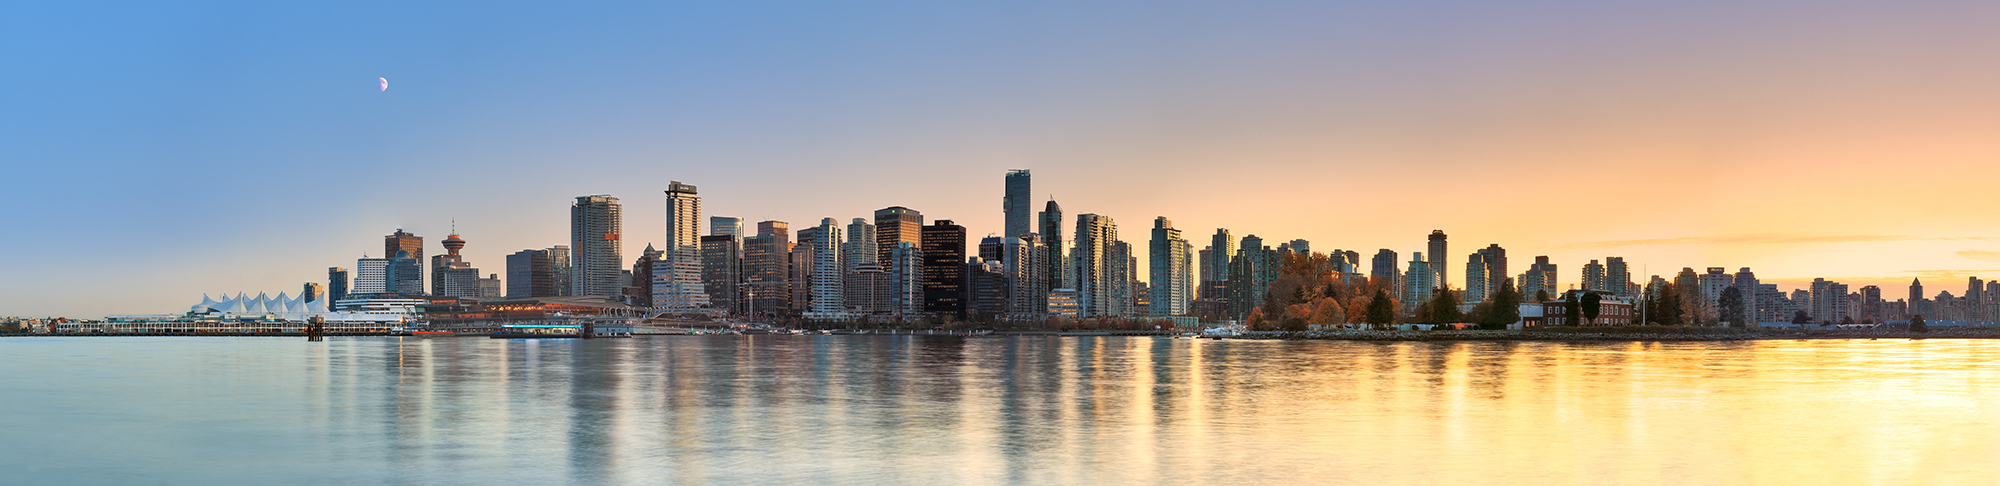 High-Resolution-Panoramic-Image-Vancouver-Coal-Harbour-Stanley-Park-Westcoast-BC-Canada